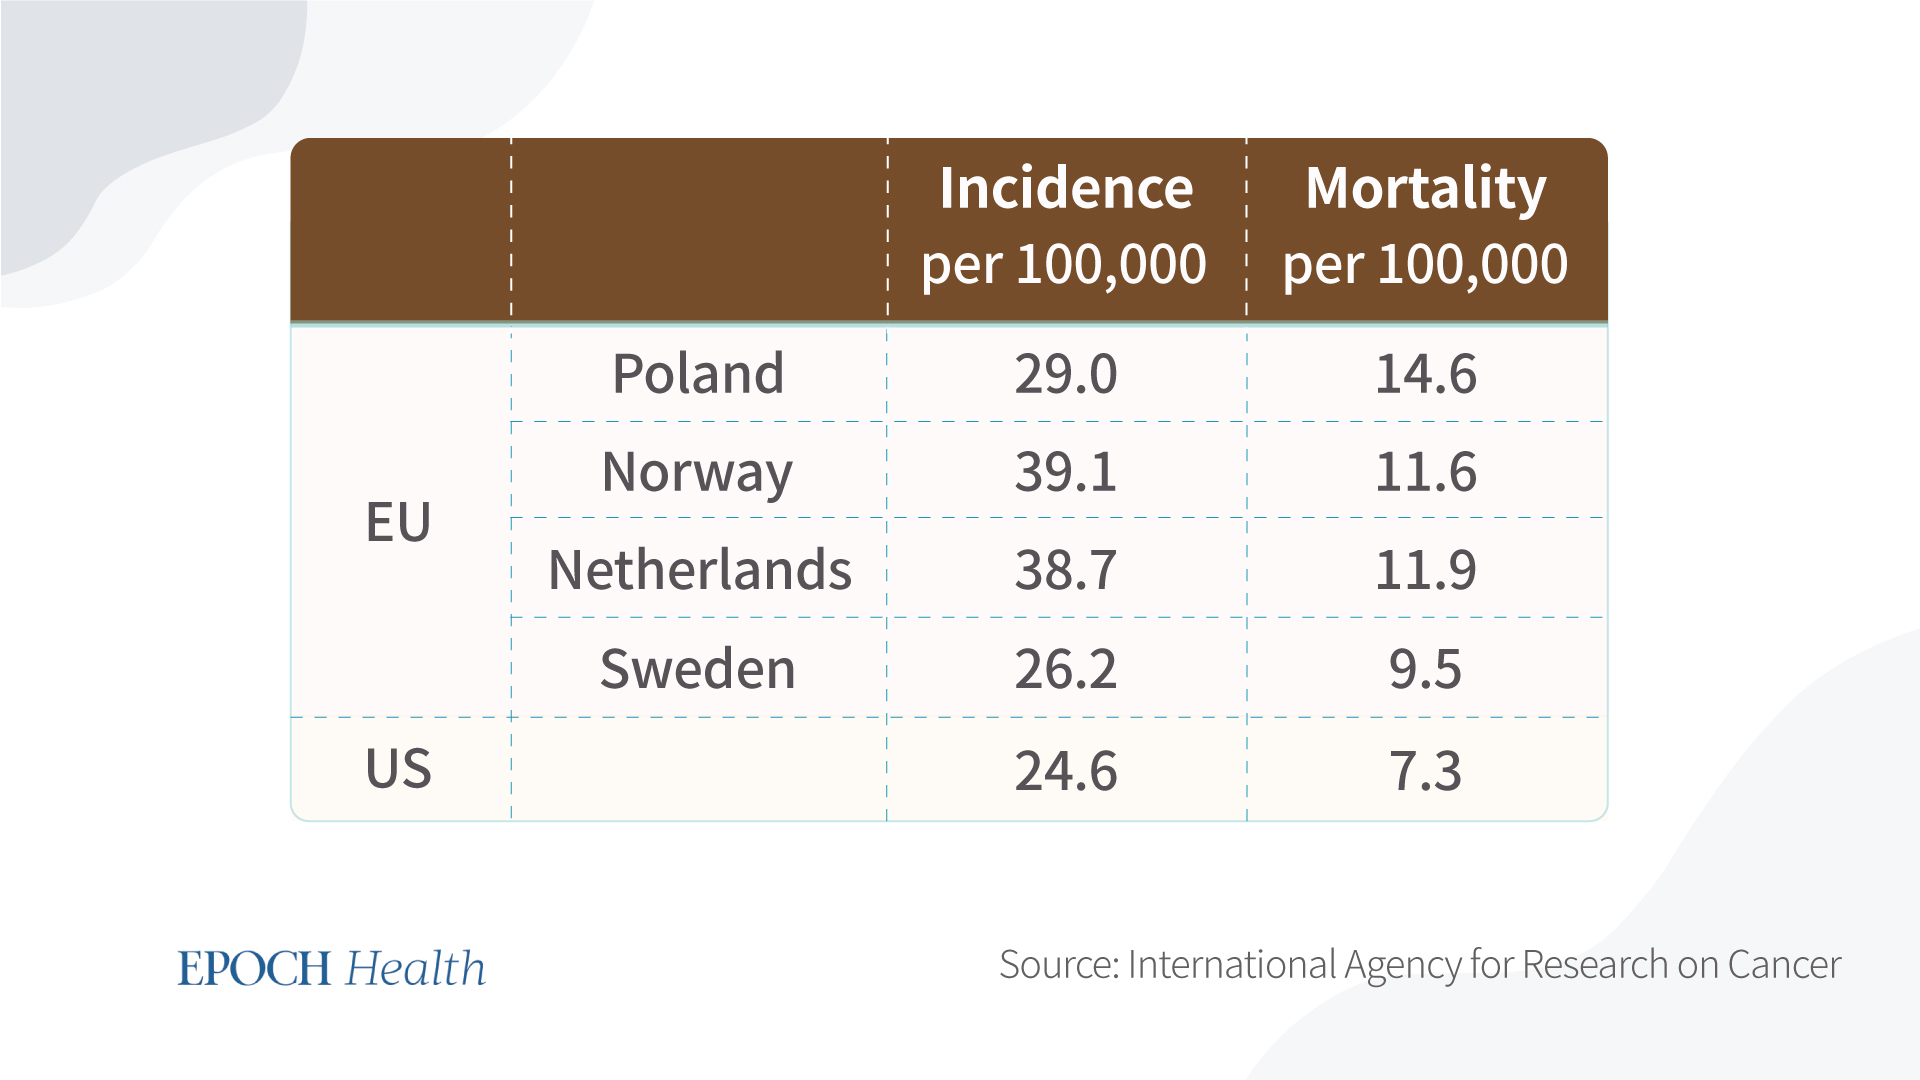 Comparison in incidence and mortality of colorectal cancer in the United States versus Europe, 2020. (The Epoch Times)